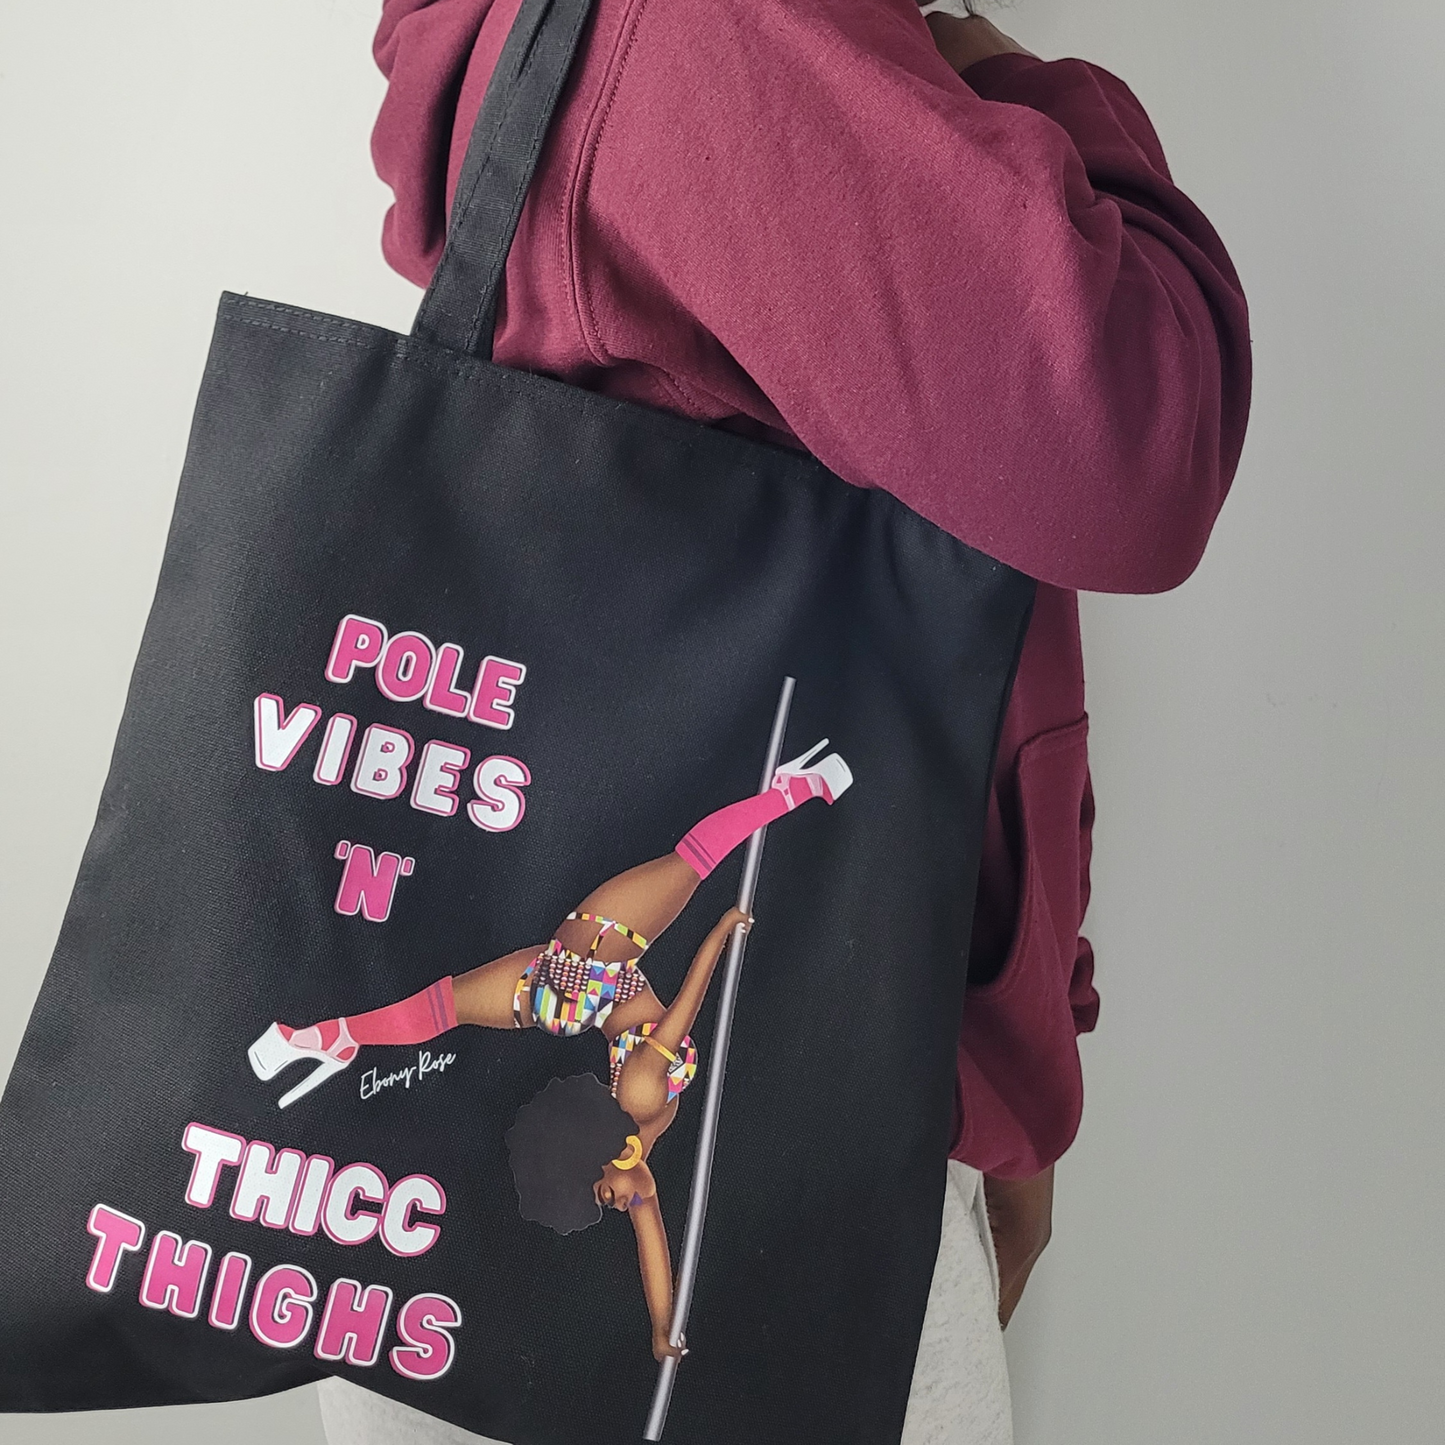 Pole Vibes 'N" Thicc Thighs - Black Pole Dancer Tote Bag